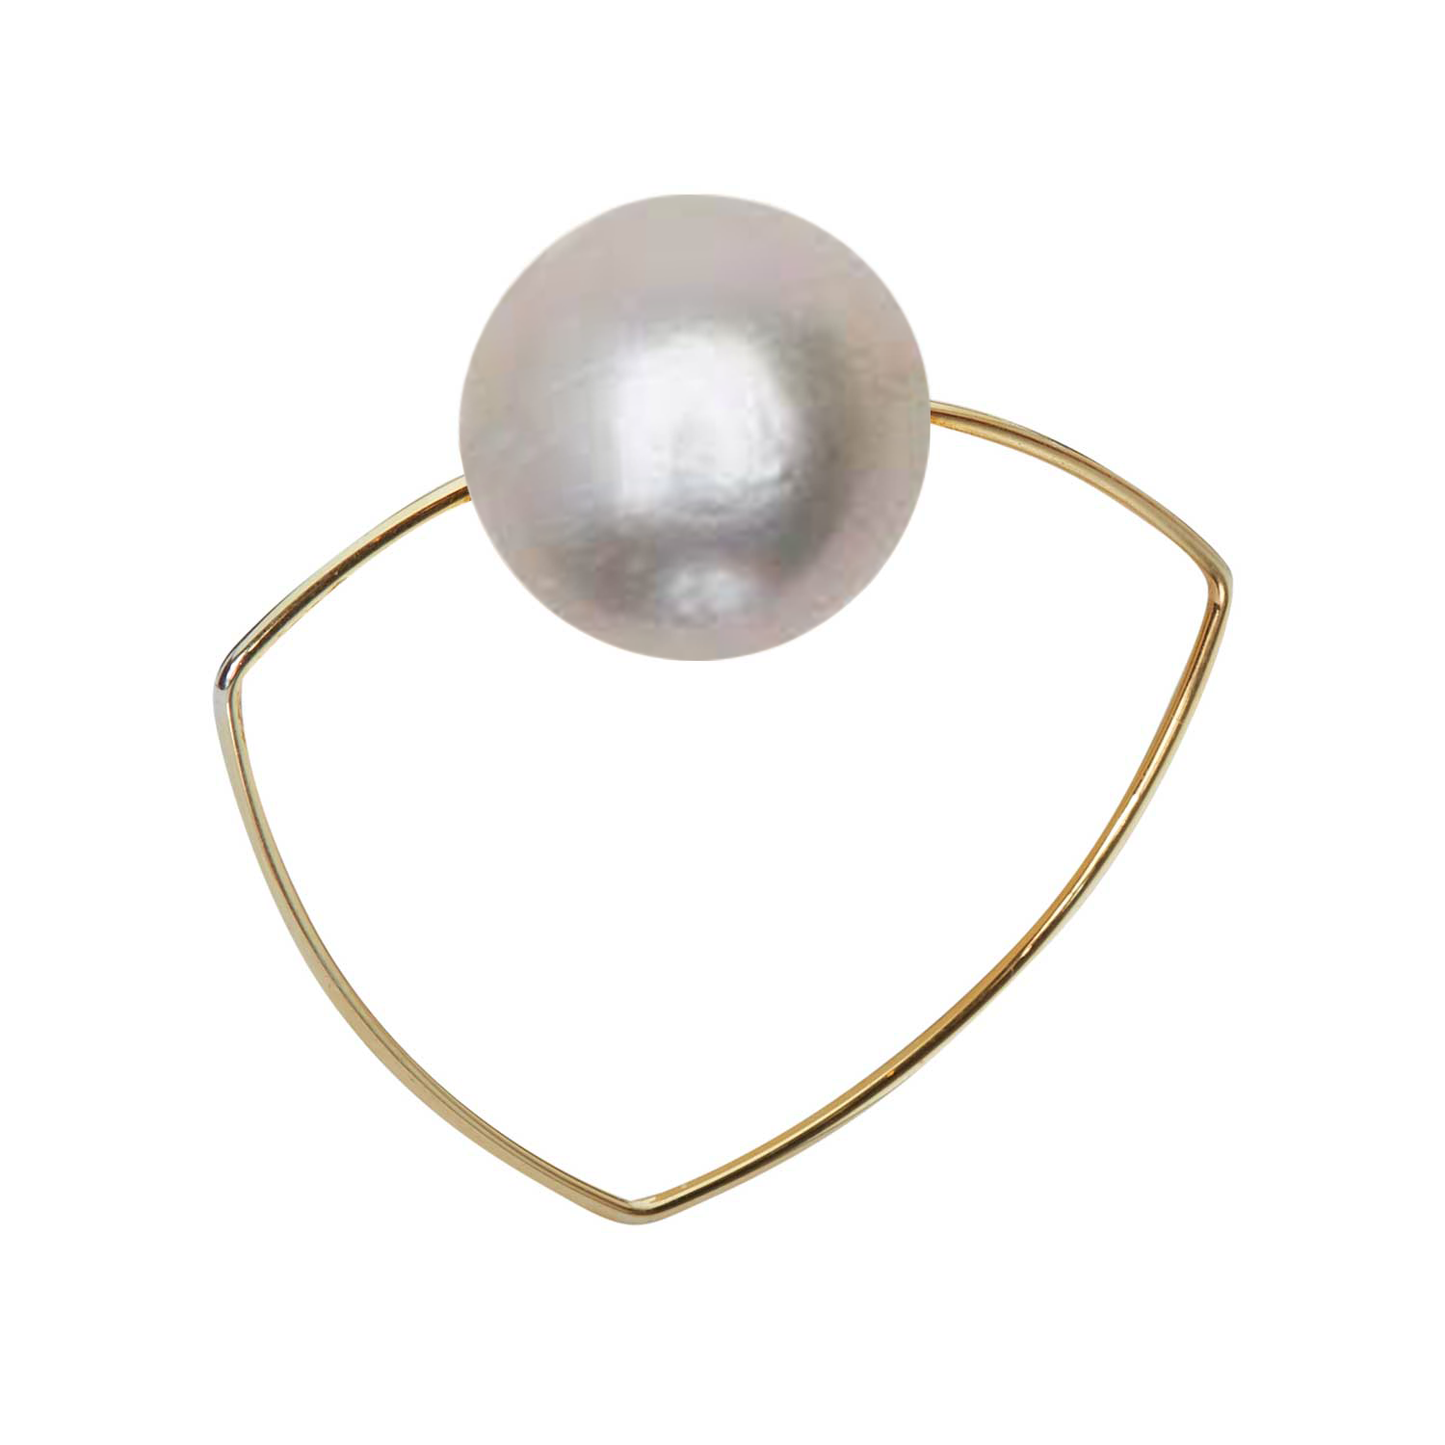 Triangle Ring with Peach Ripley Baroque or Freshwater Pearl (12mm)